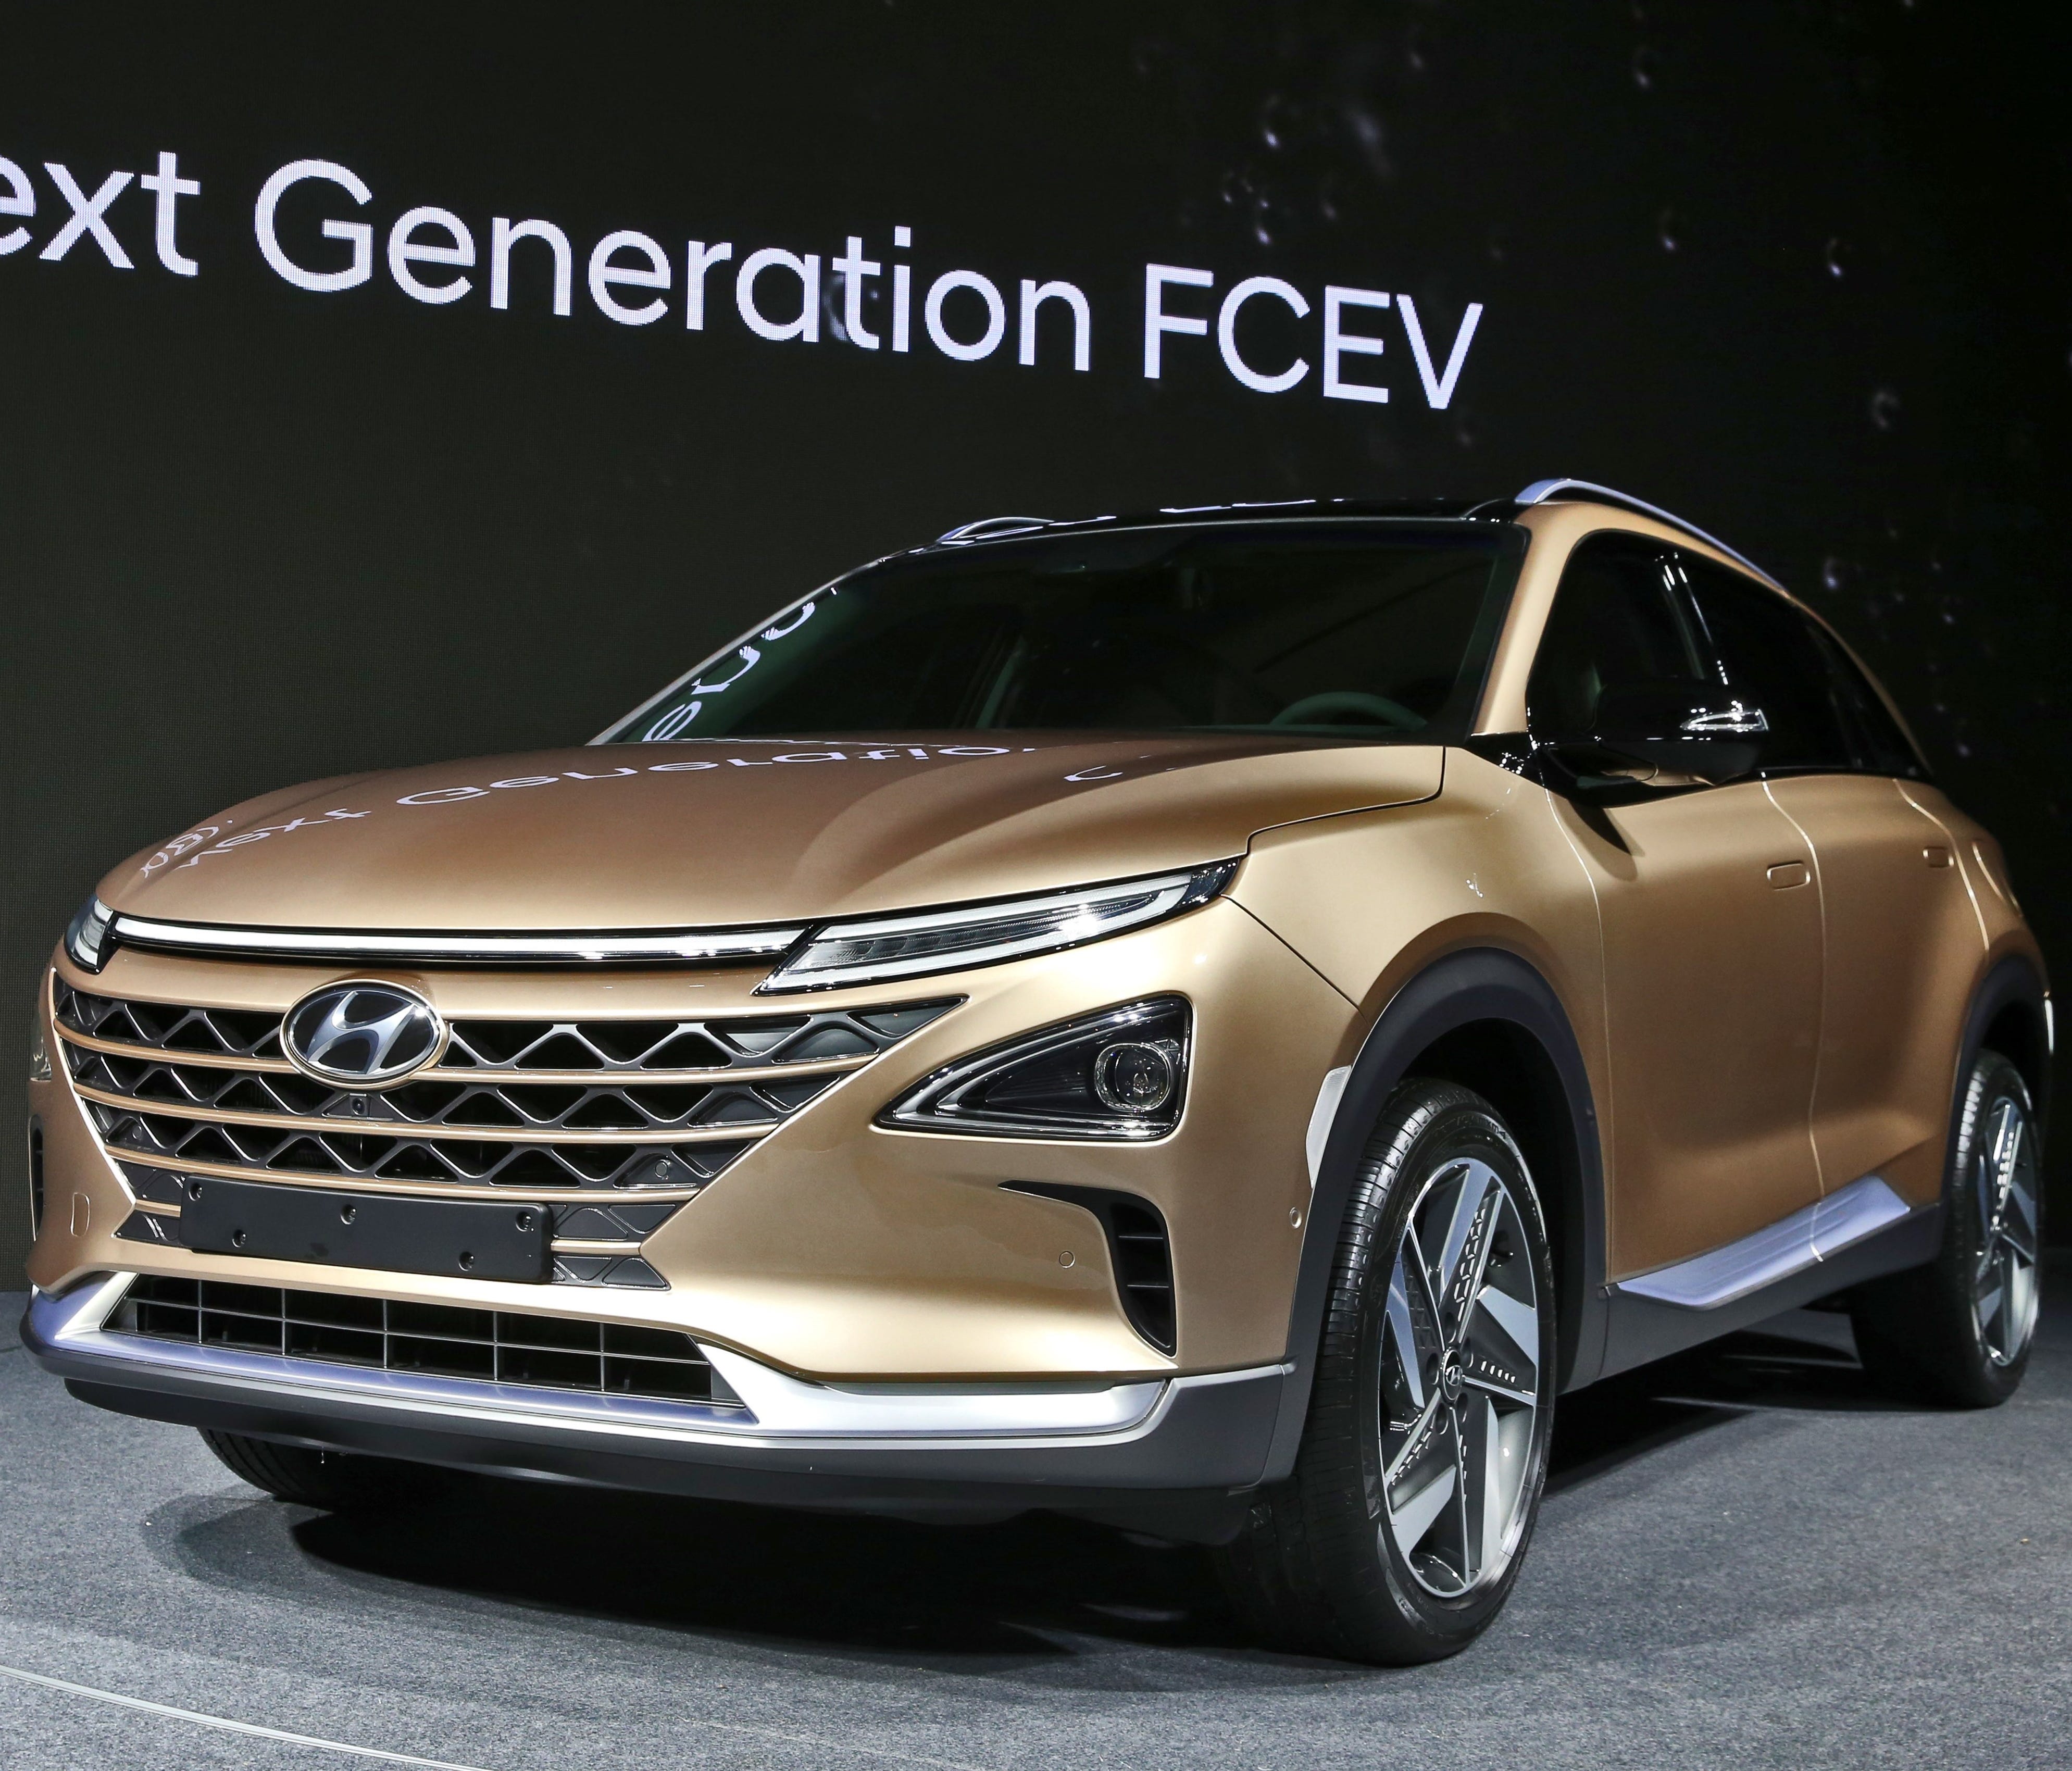 Hyundai showed off a new hydrogen fuel cell sport-utility vehicle, unnamed as of August 2017.